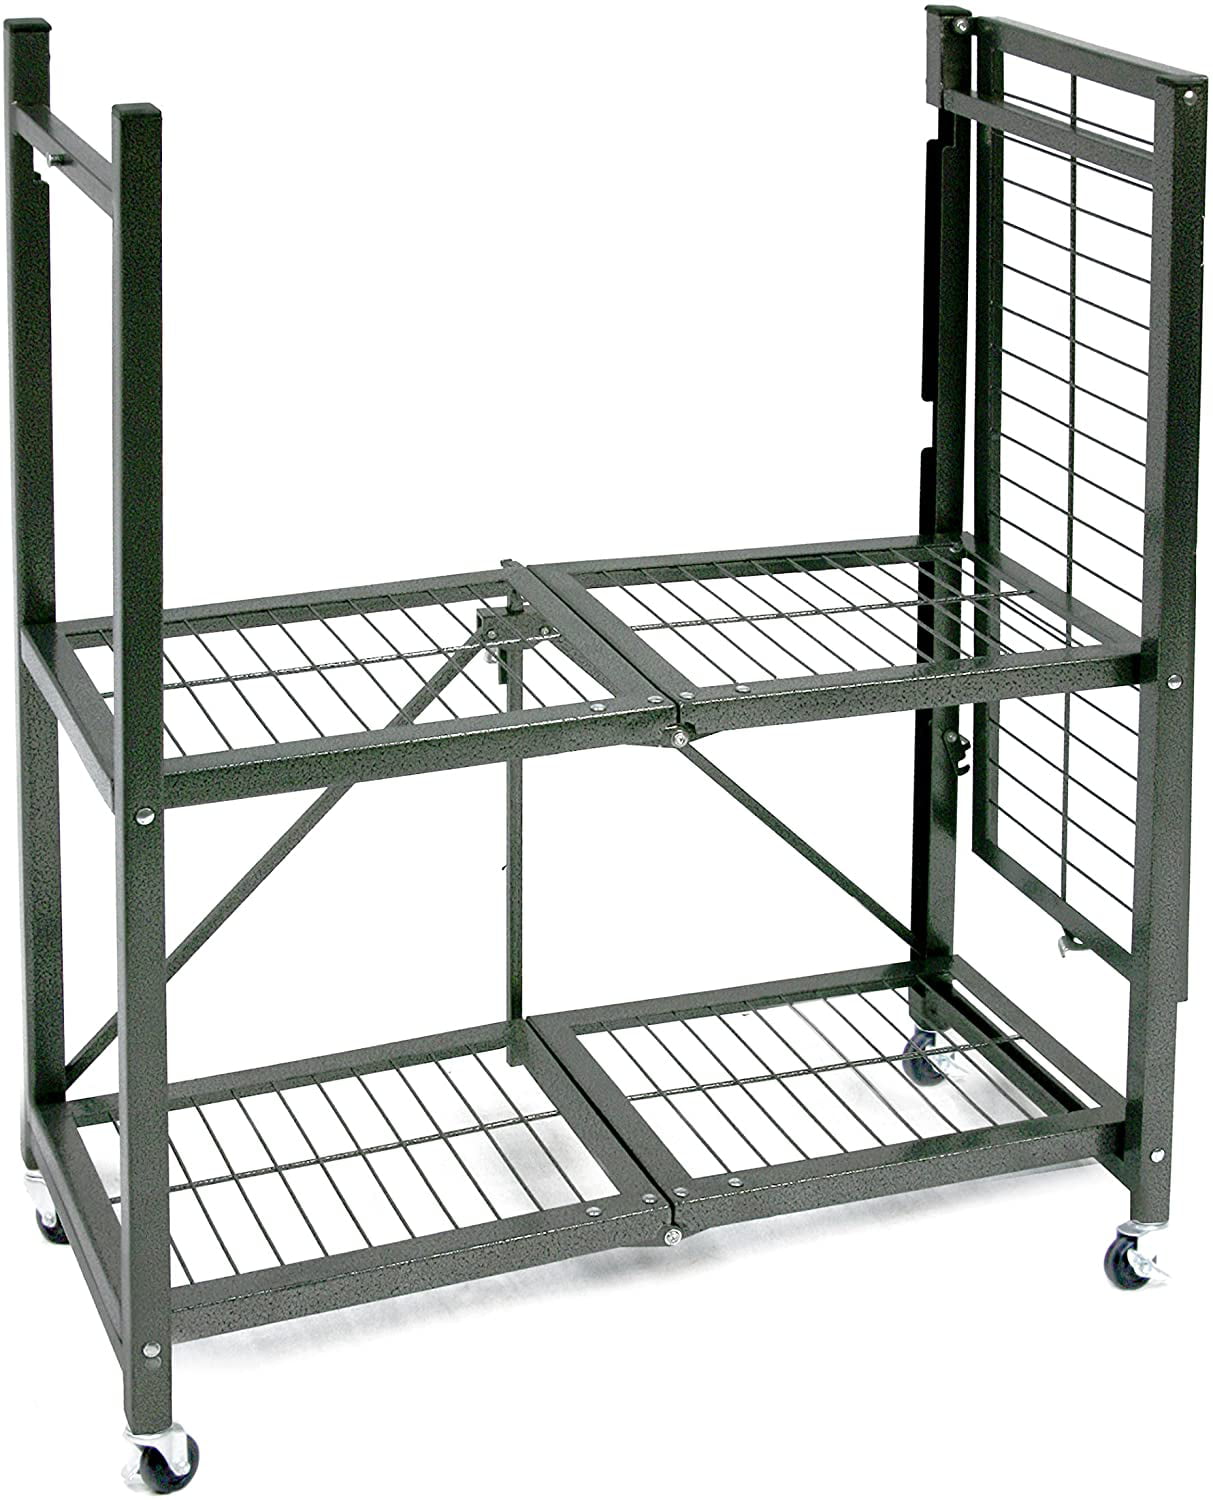 Black Pre-Assembled Origami 3-Shelf General Purpose Collapsible/Foldable Shelving Unit Rolling Cart Small Rack with Wheels Organizer Home Kitchen Laundry Closet Storage Metal Wire